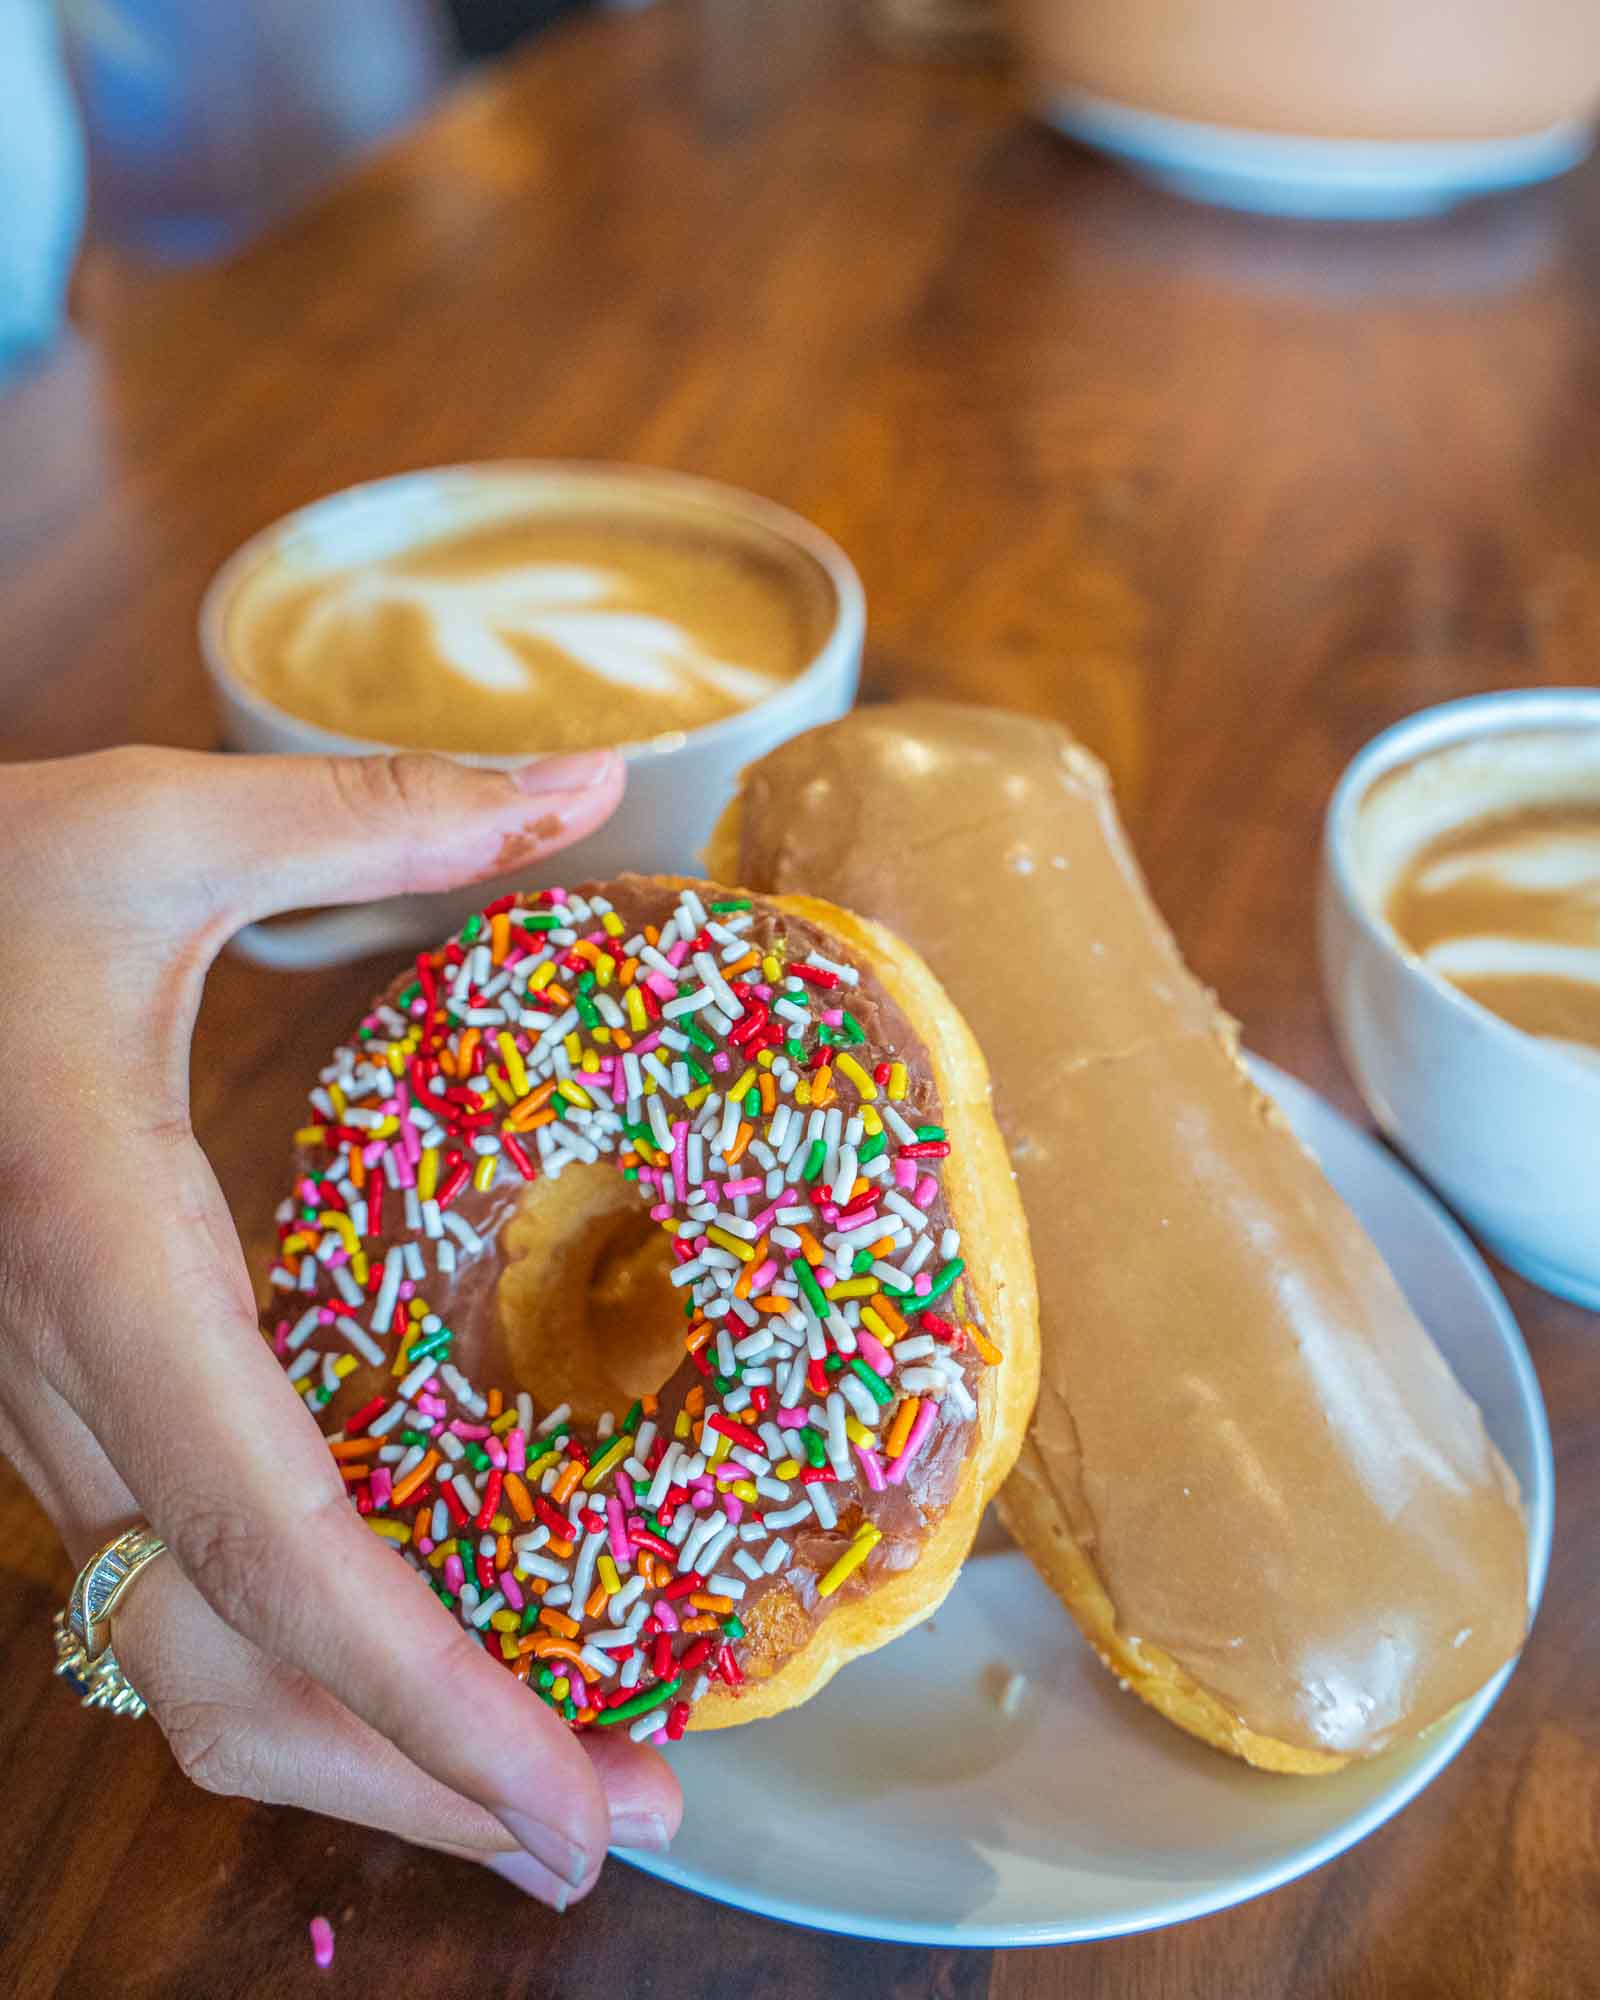 A plate of donuts with a specialty latte